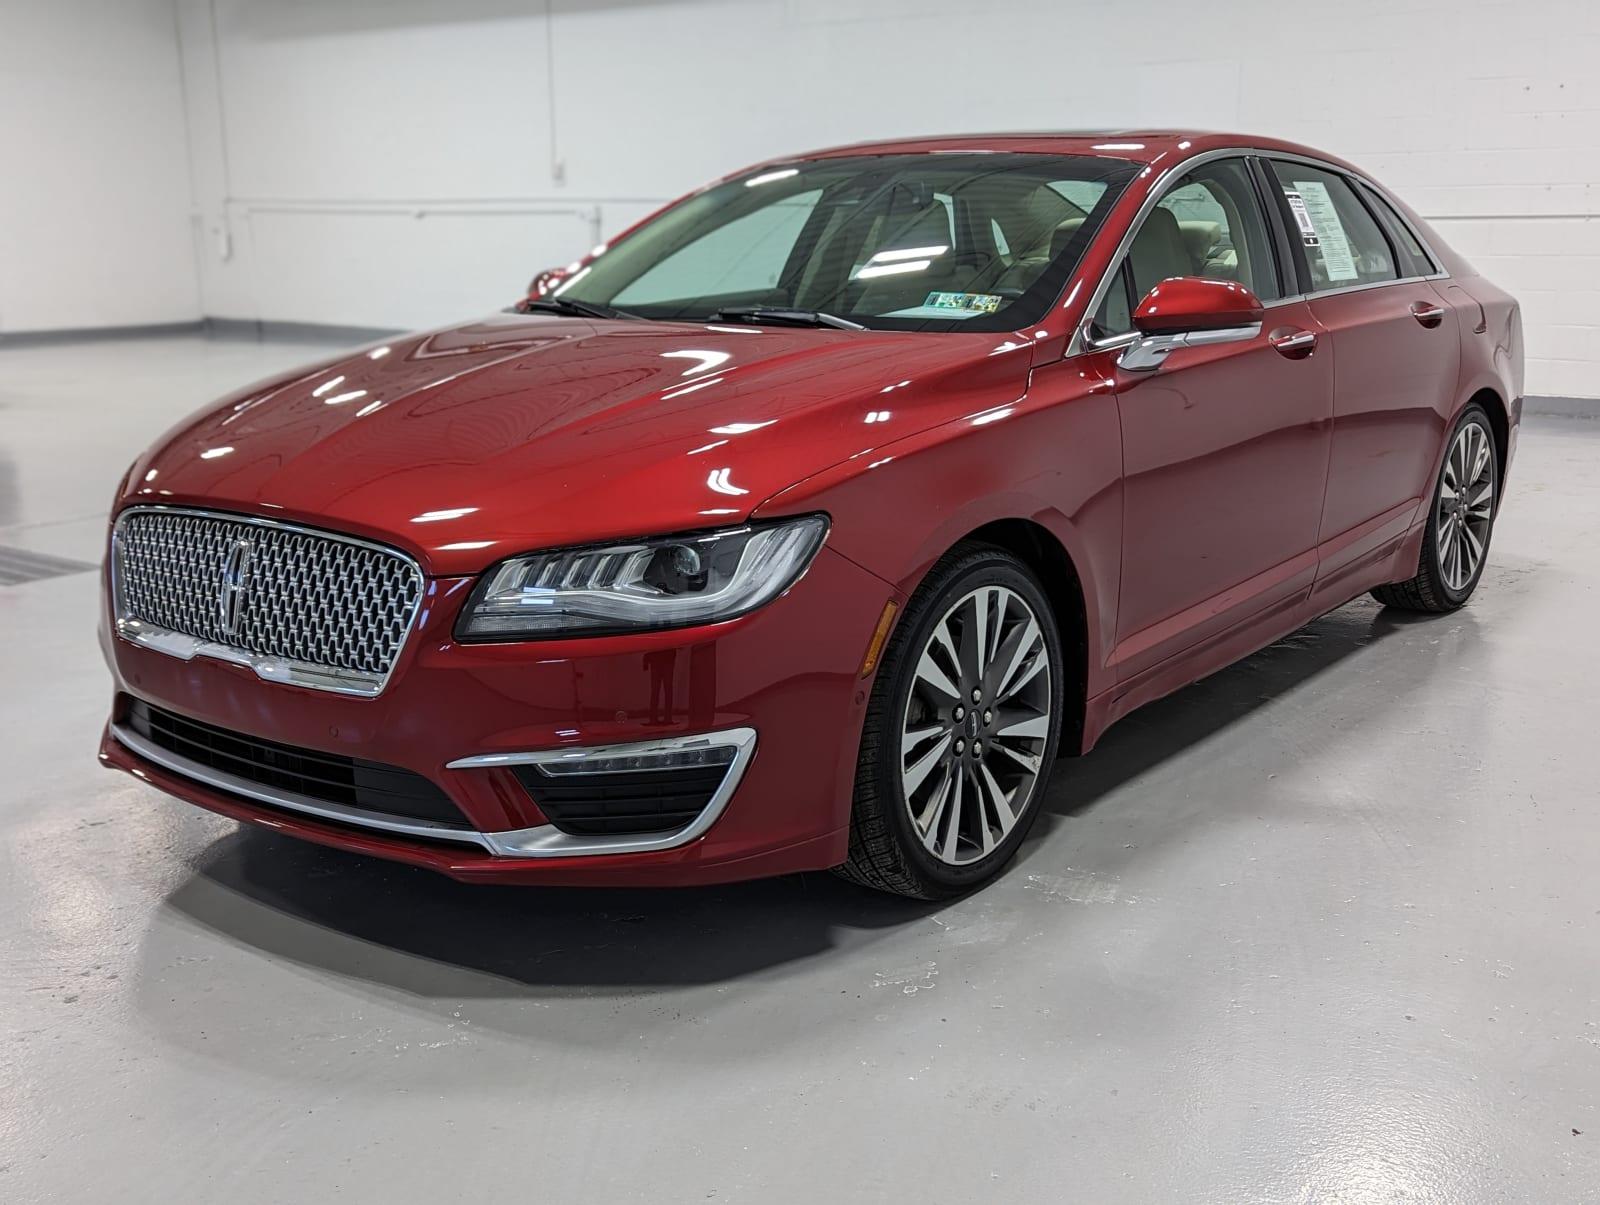 Certified Pre-Owned 2019 Lincoln MKZ Reserve II in Ruby Red Metallic Tinted  Clearcoat | Greensburg, PA | #F83142F